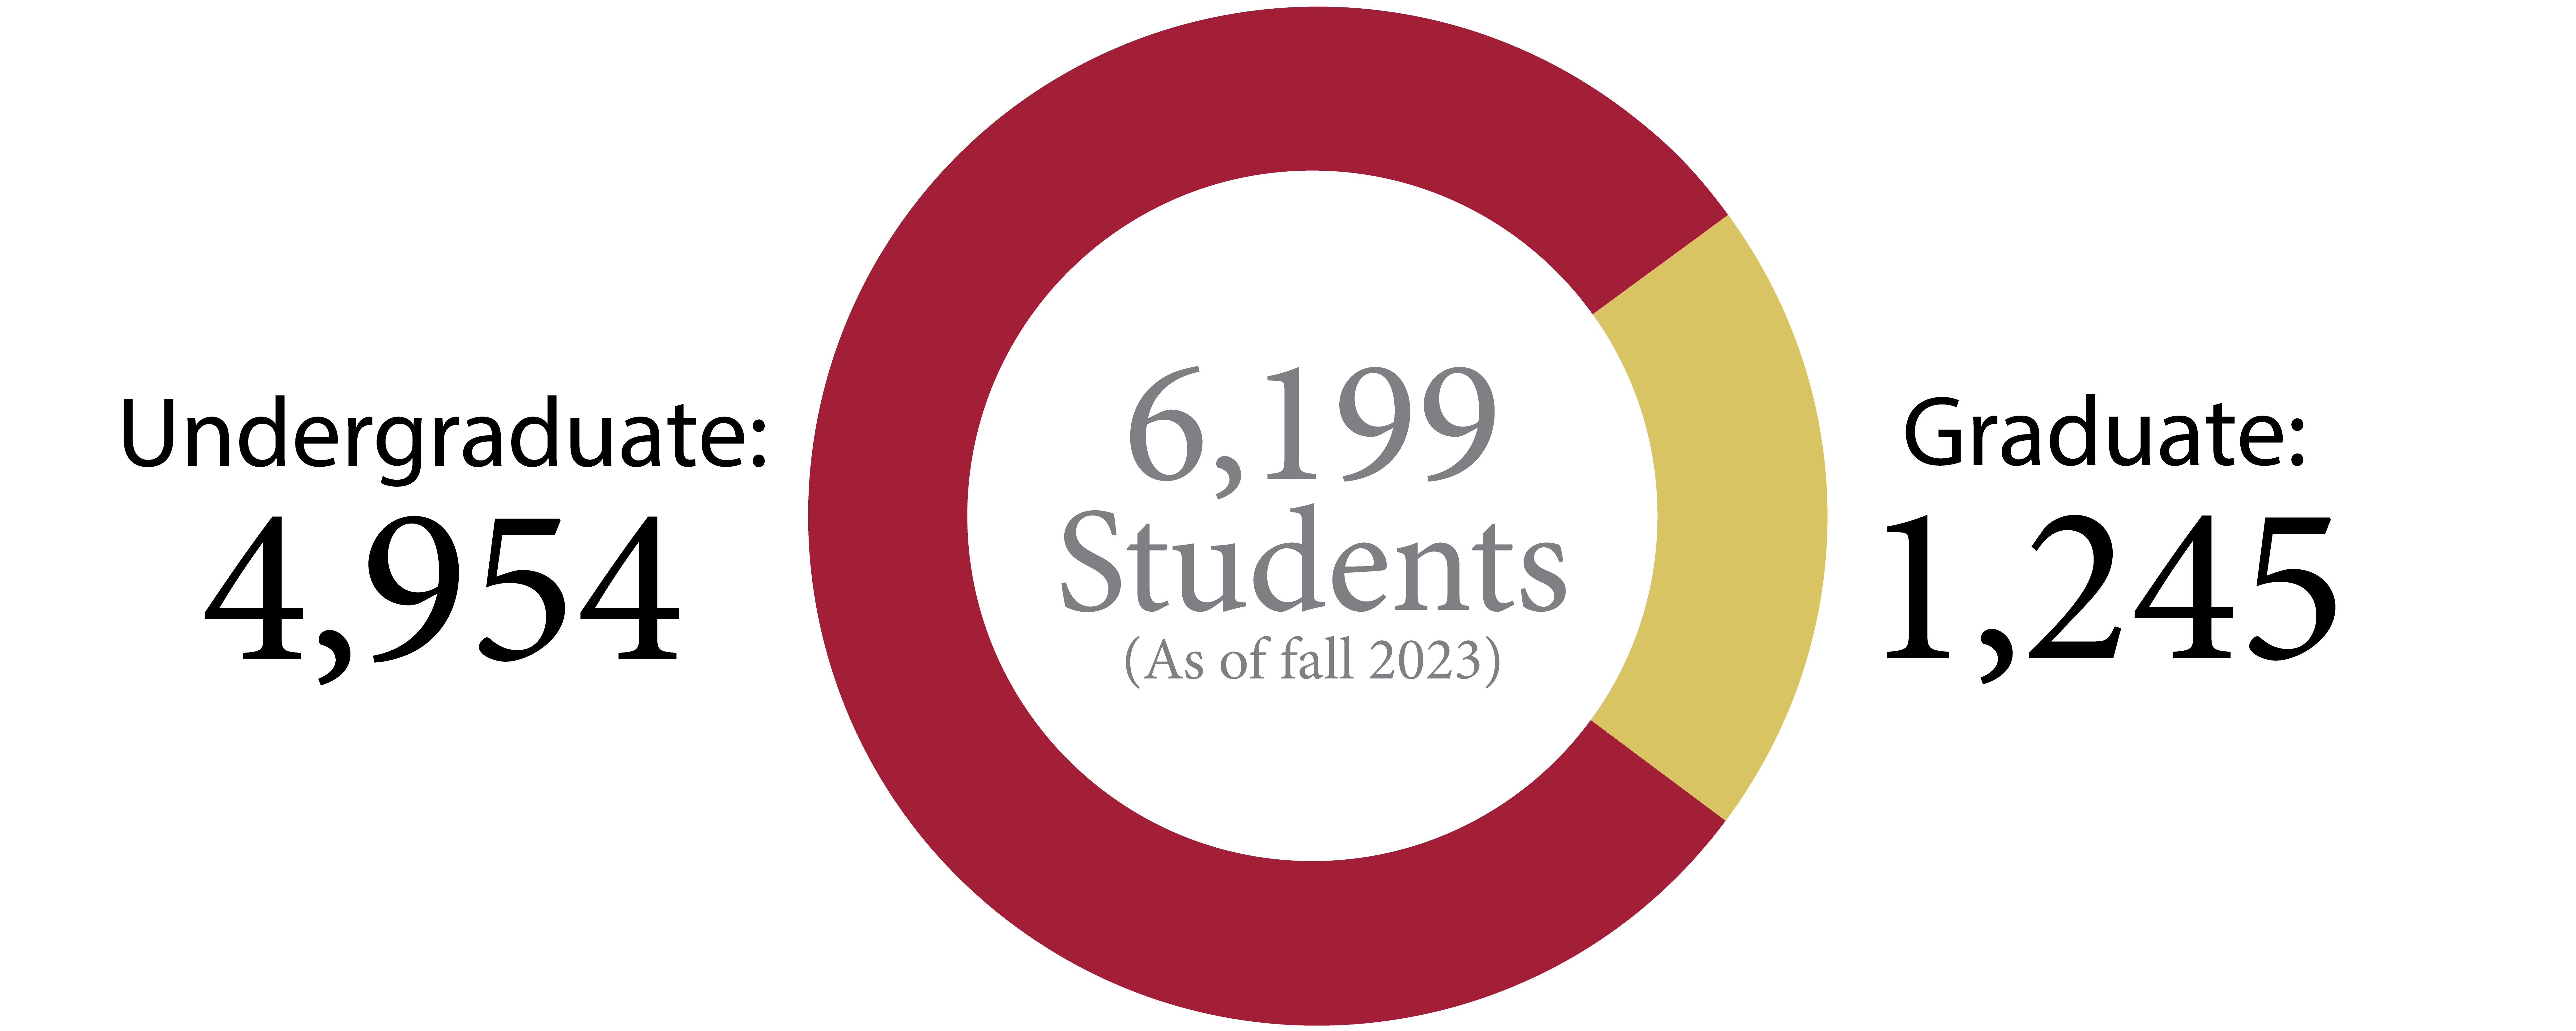 Chart shows 4,954 undergraduate and 1,245 graduate students, totaling 6,199, as of fall 2023